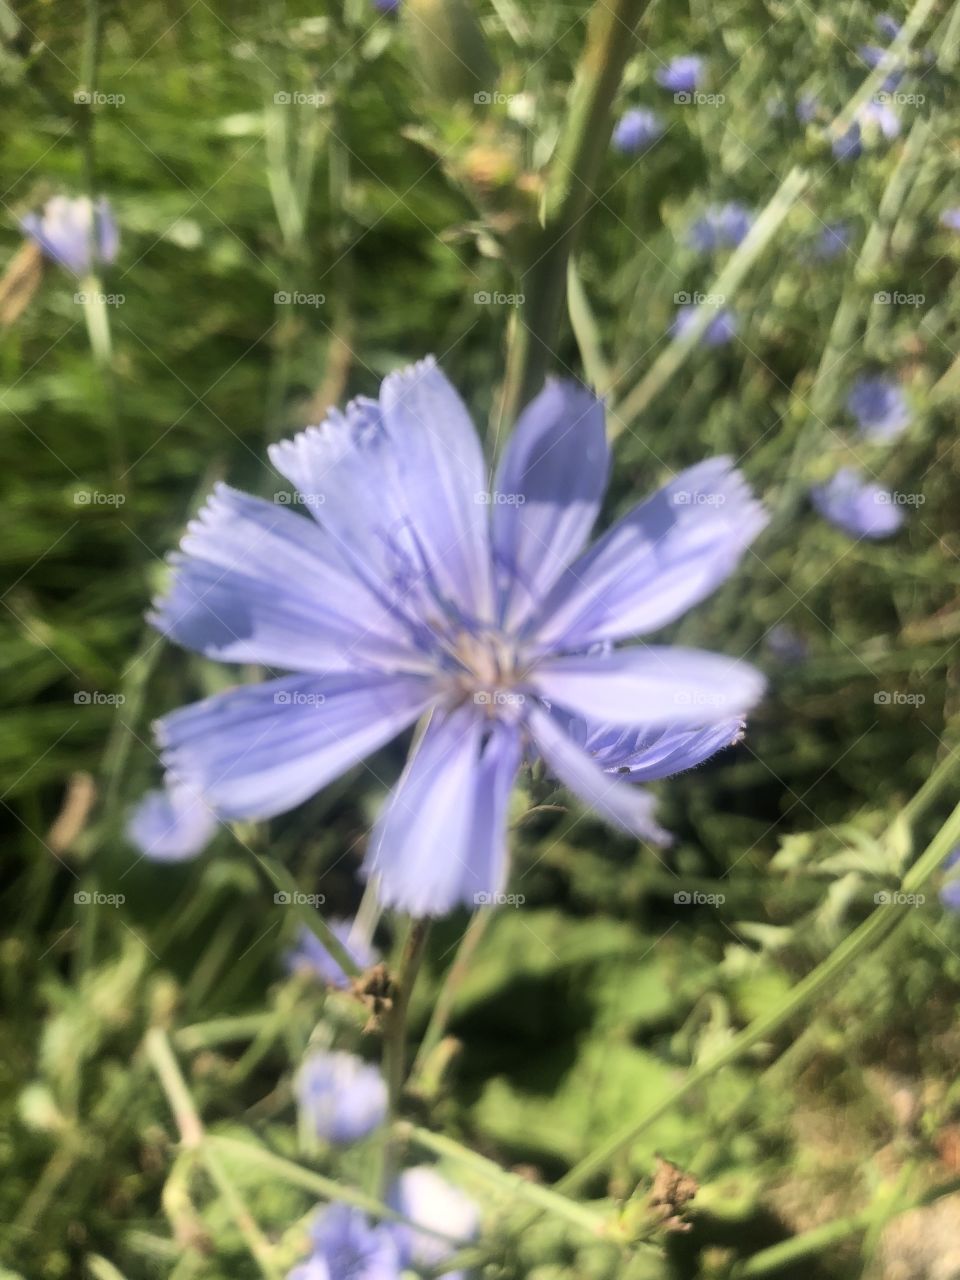 We have these beautiful wildflowers that I thought was a weed. It turns out that this is Chicory. 